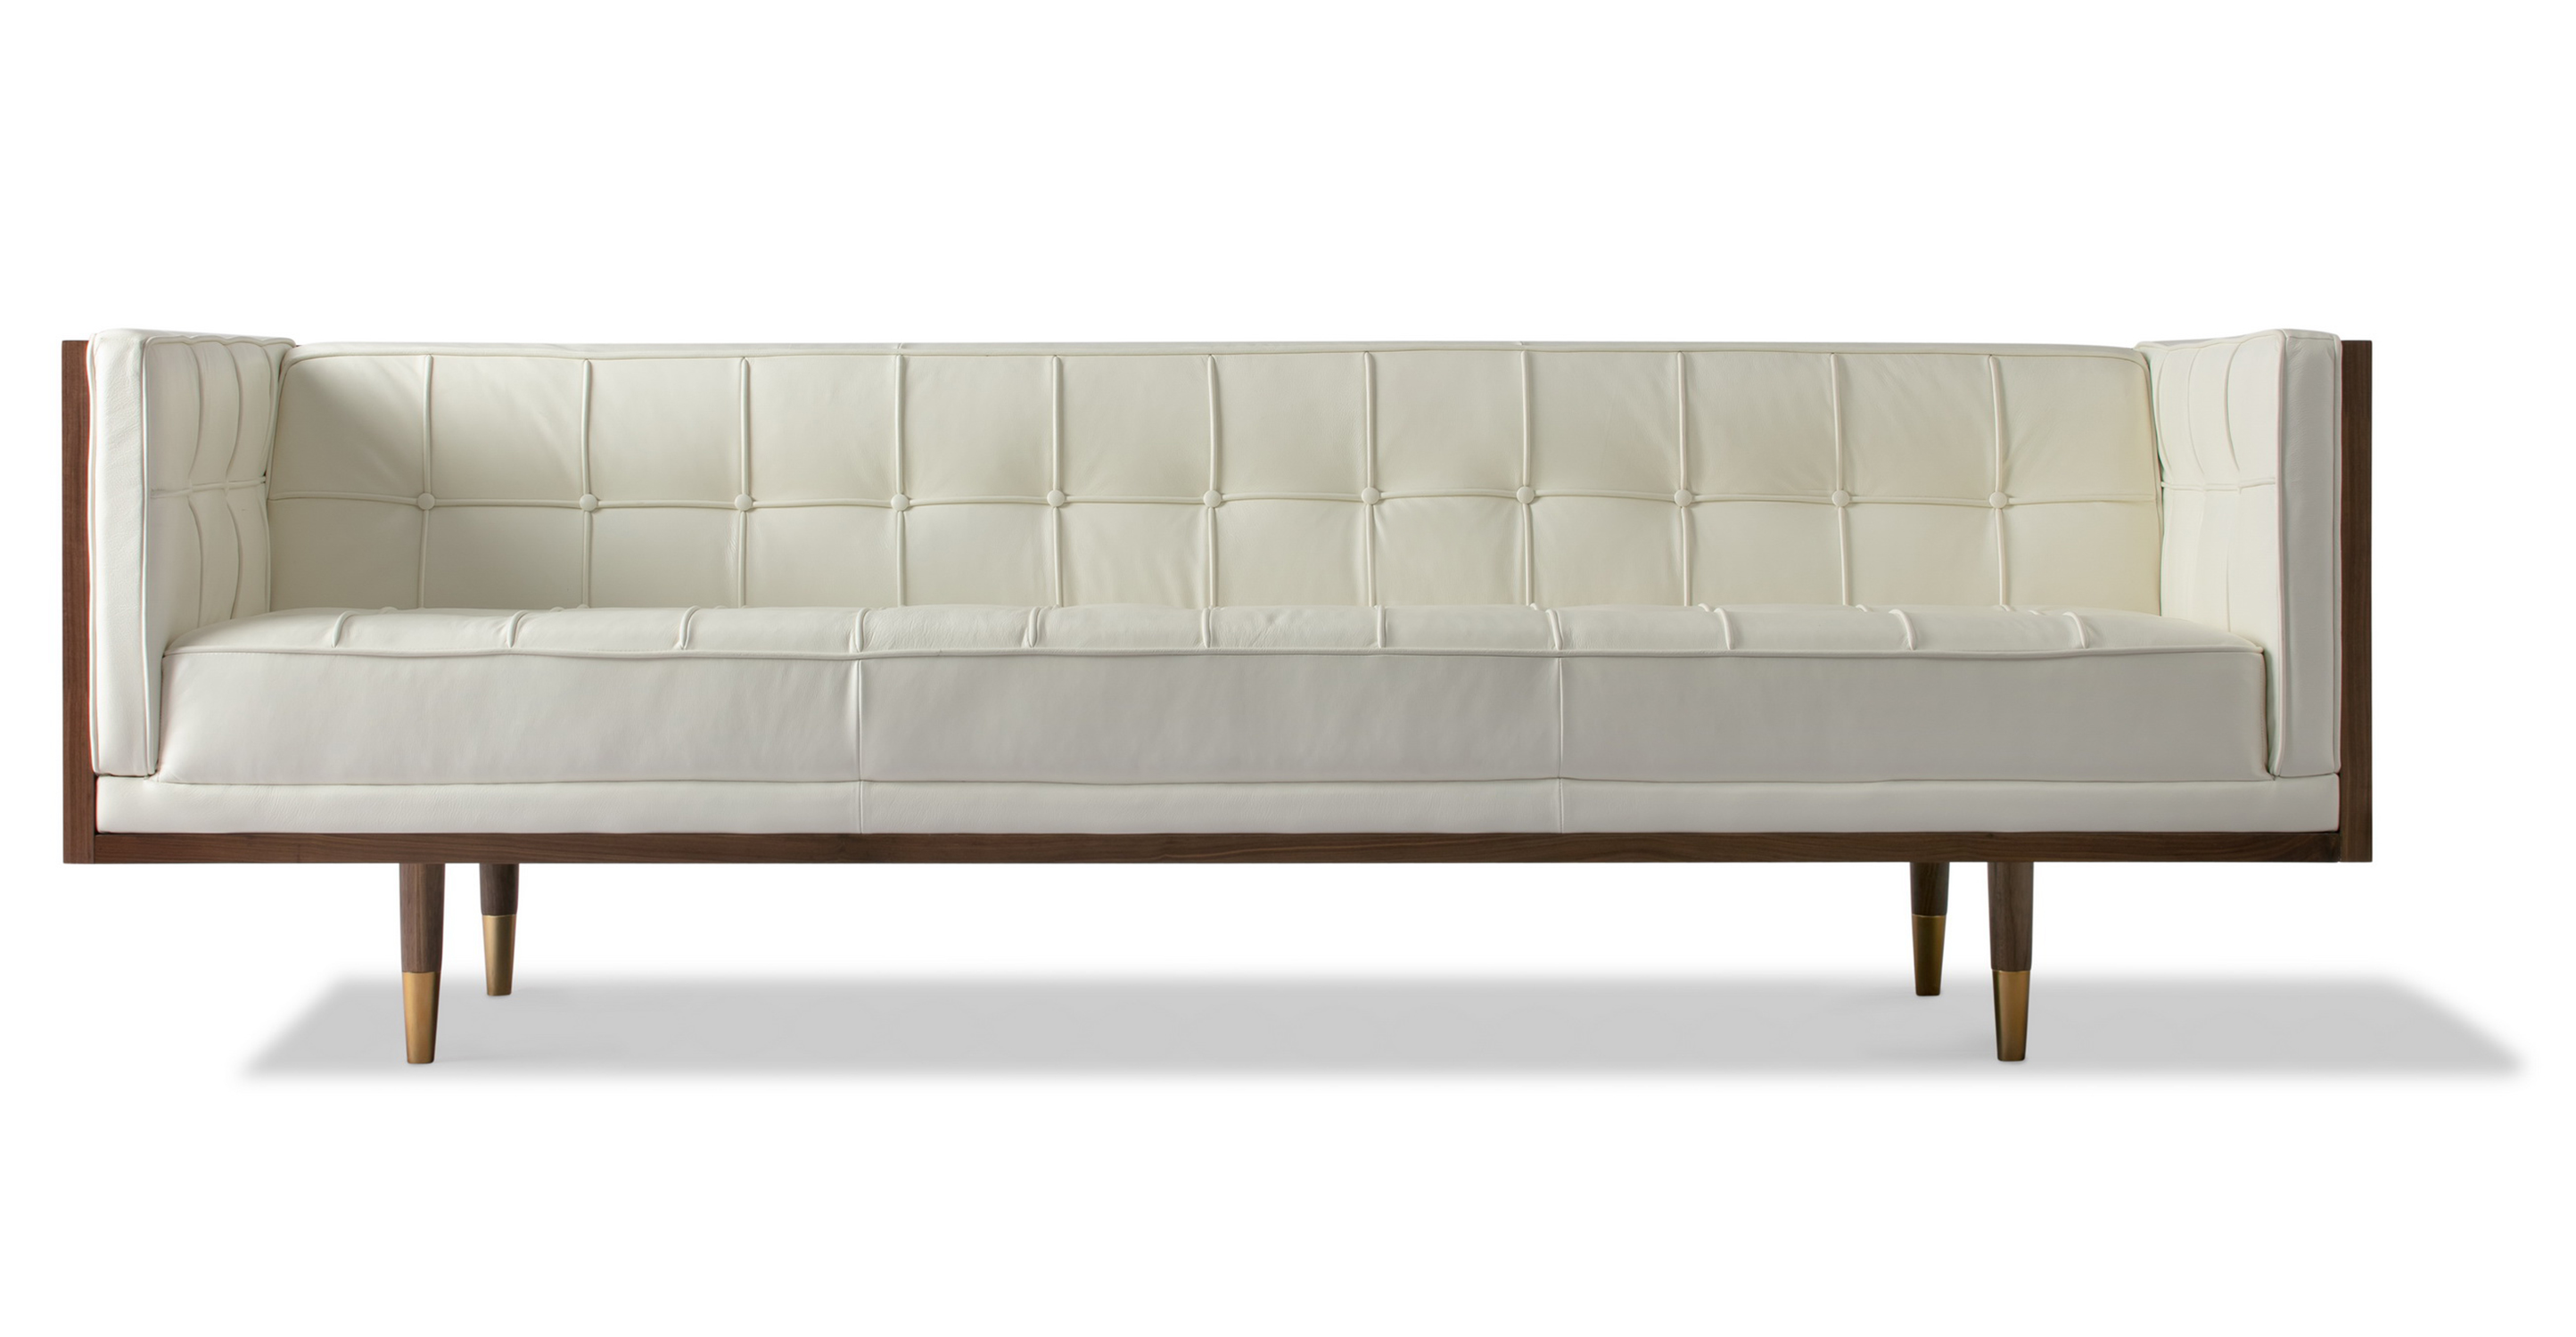 Woodrow 3 Seat Sofa in White Leather has fixed seat and back cushions. There is button tufting on the back cushion, sides of the sofa and on the seat cushions. The frame and legs are walnut colored. The legs have brass colored ferrules on the ends. The back and outsides of the sectional are wooden. The leather color is white.